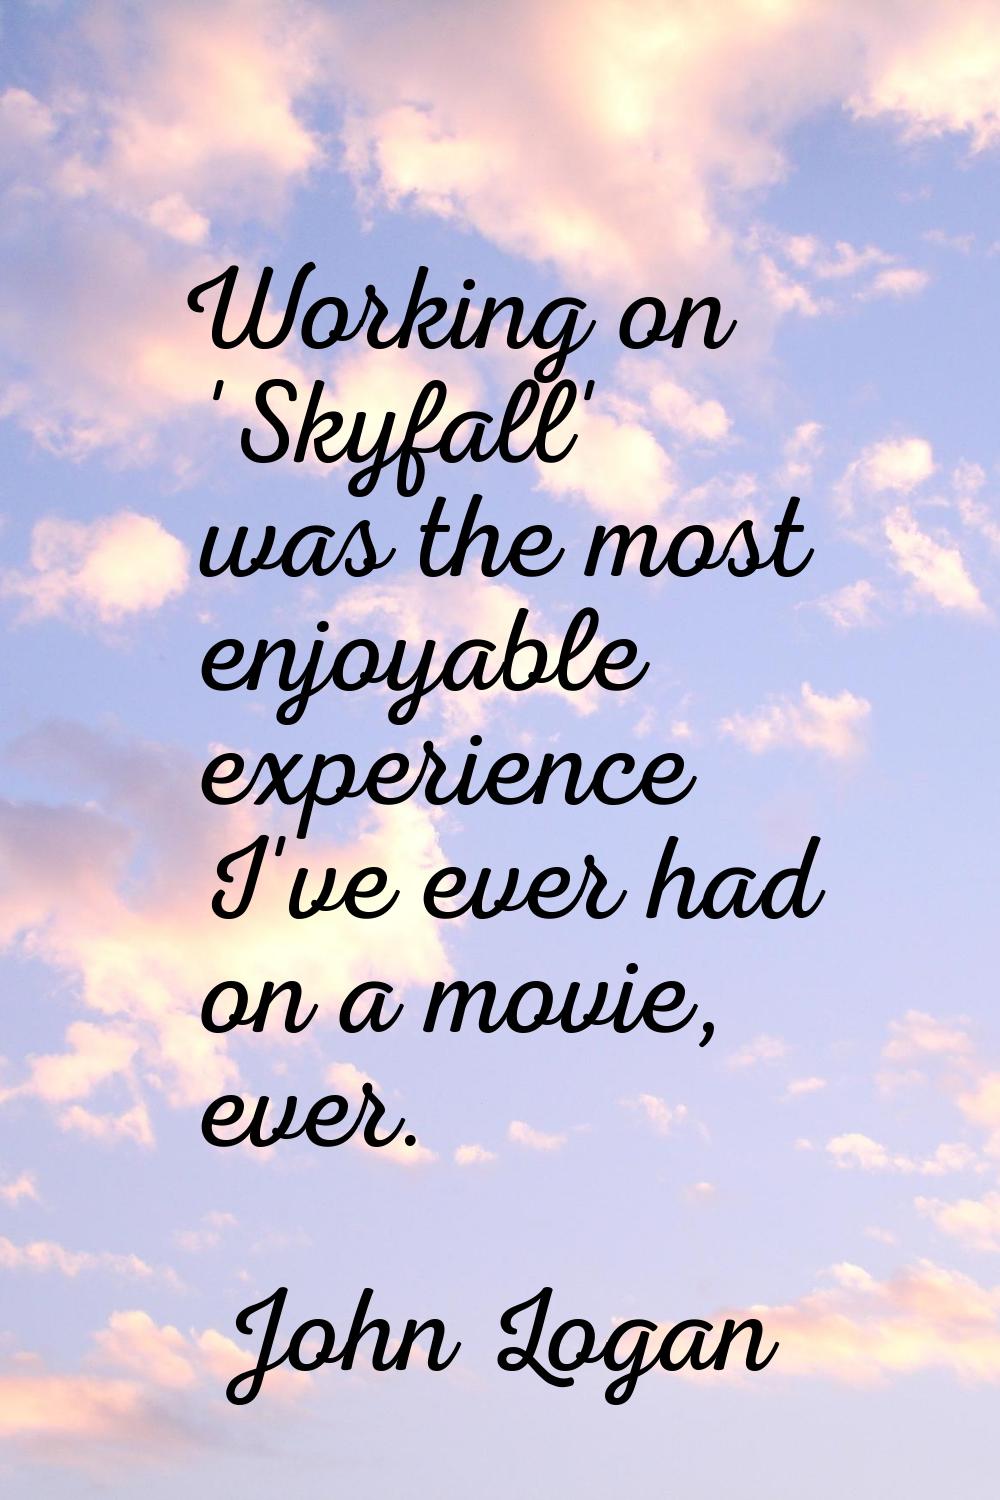 Working on 'Skyfall' was the most enjoyable experience I've ever had on a movie, ever.